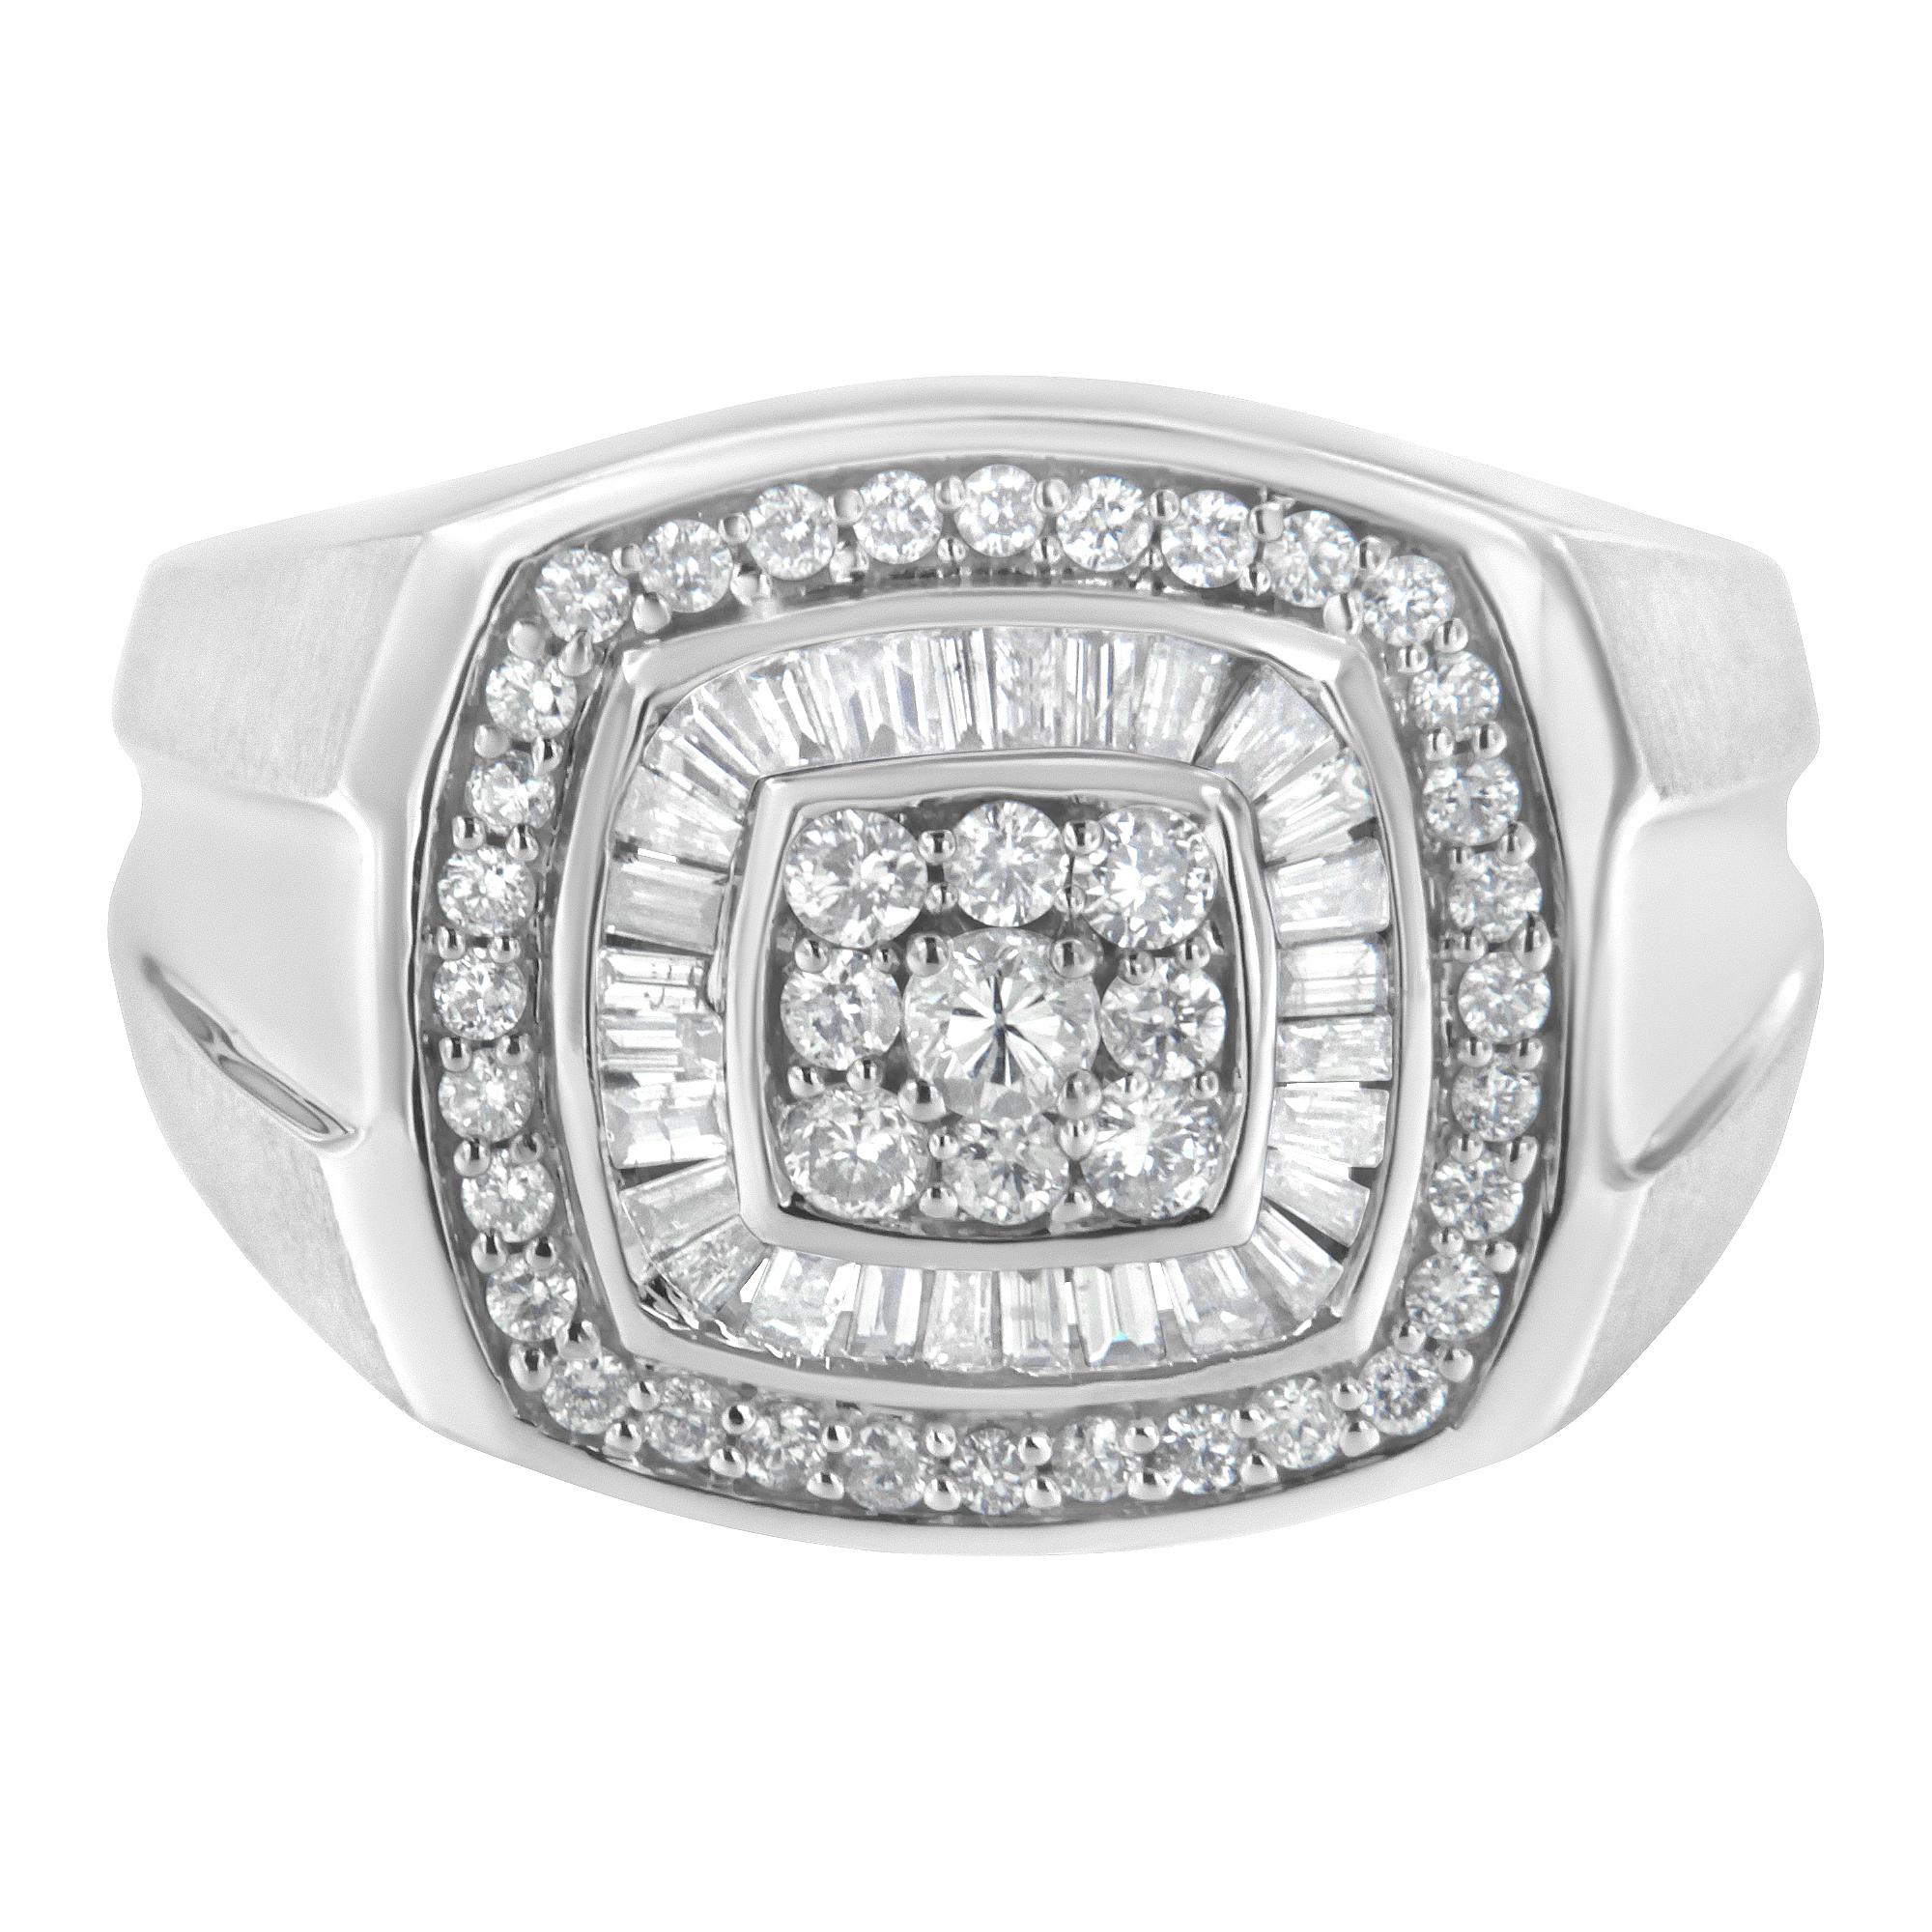 Contemporary 14K White Gold Men's 1.0 Carat Diamond Band Ring For Sale